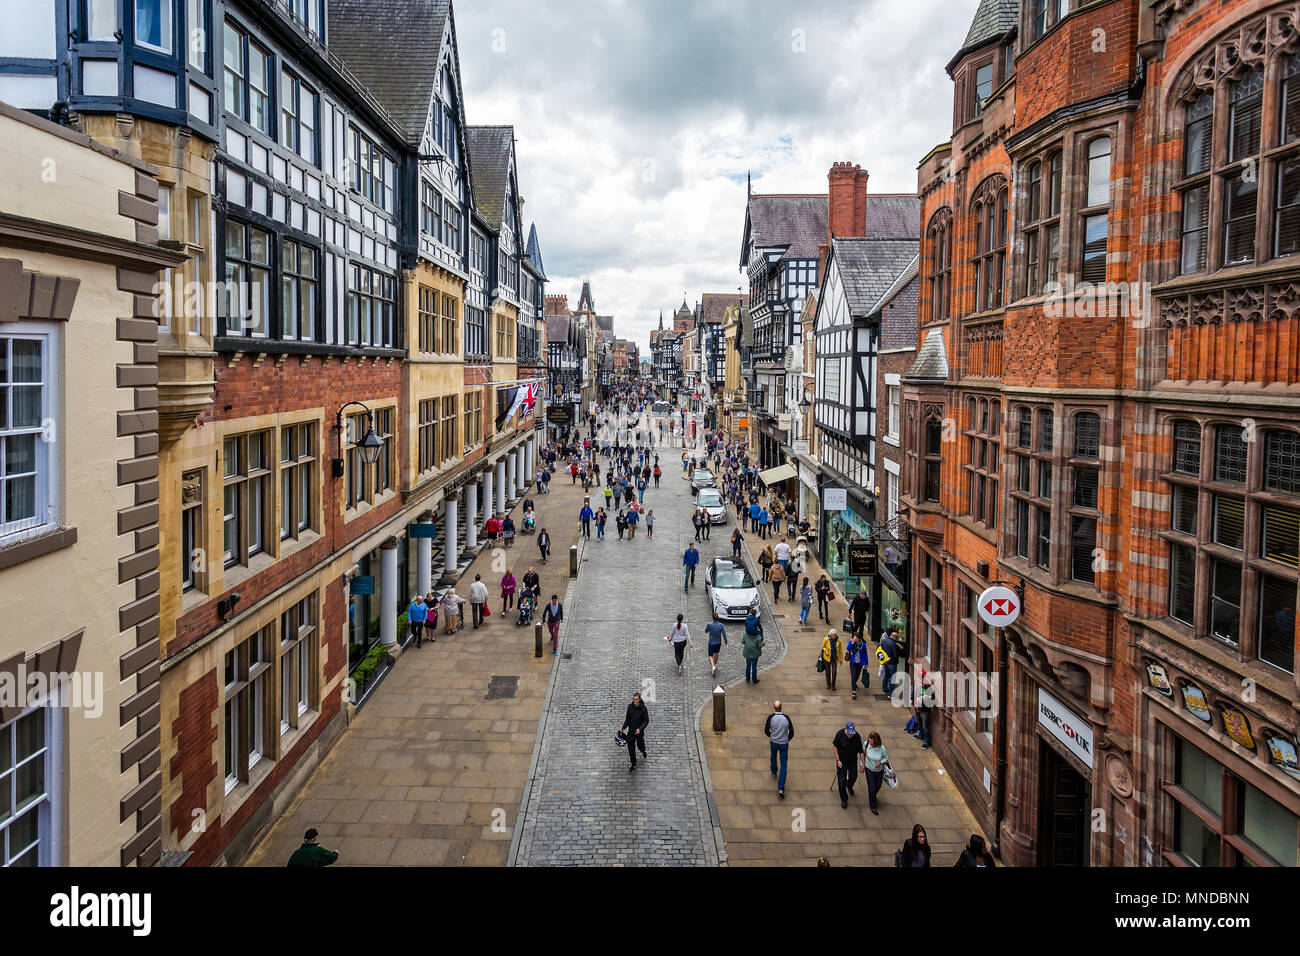 Eastgate Street in Chester, Cheshire, UK taken on 13 May 2017 Stock Photo